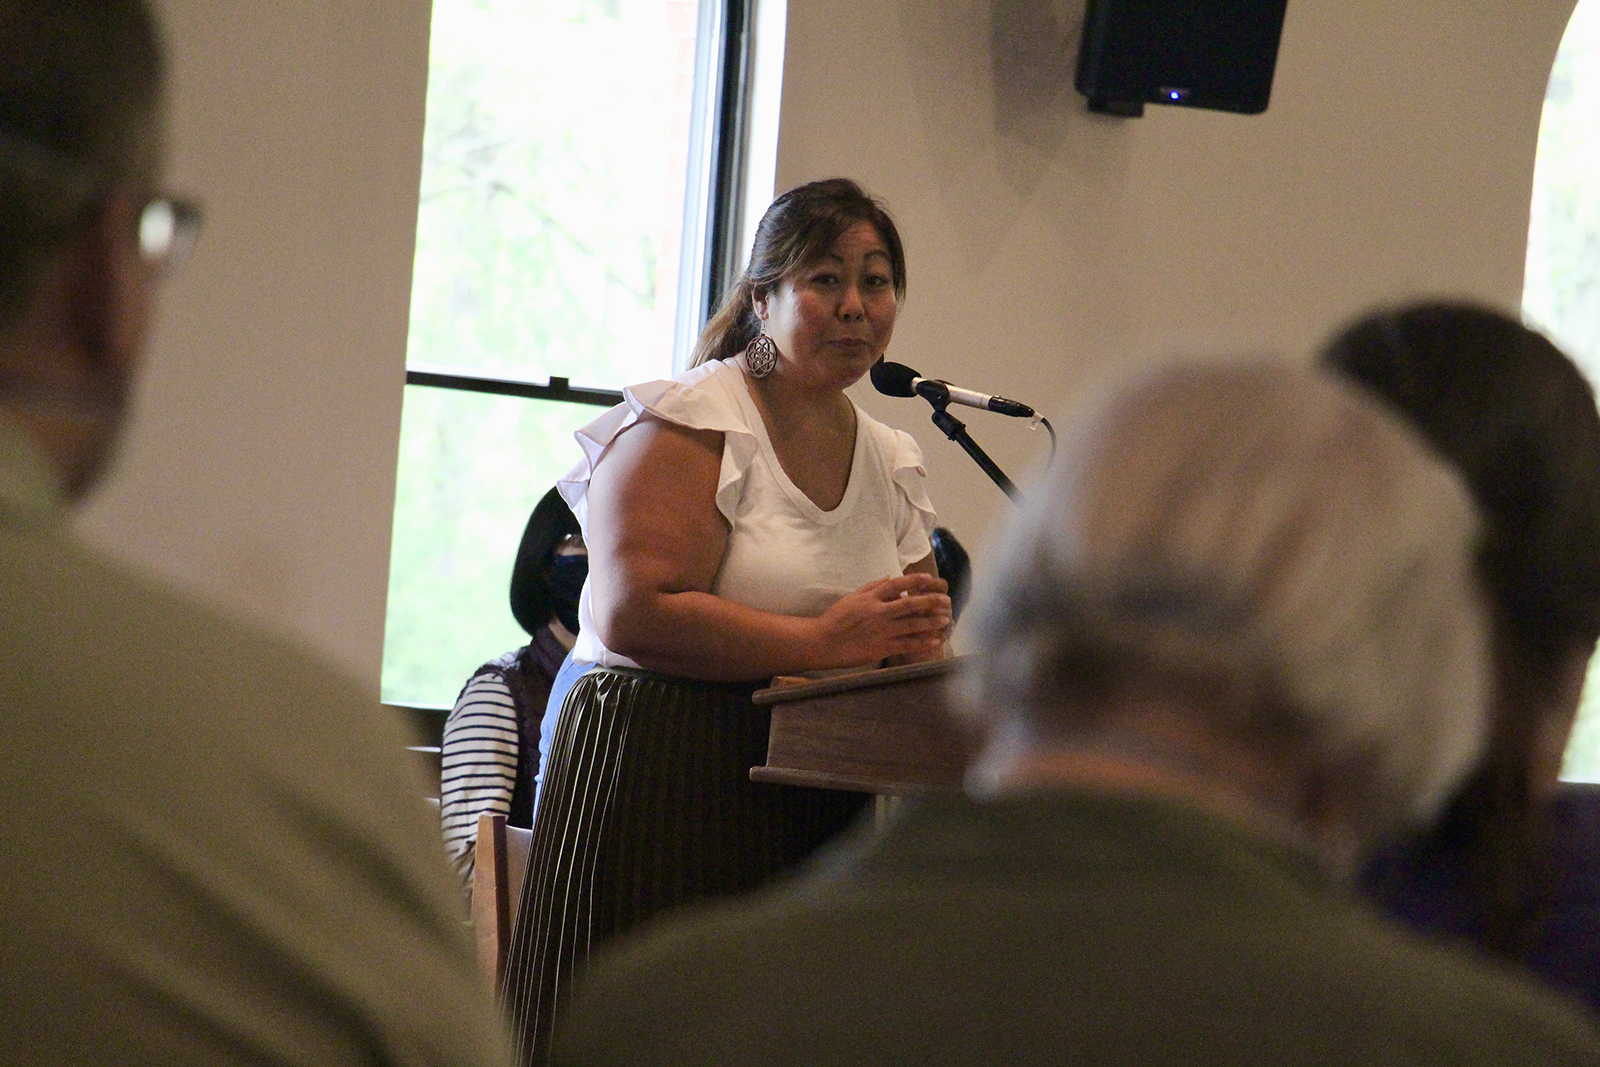 The Rev. Juliet Liu speaks to the congregation at Life on the Vine Church in Long Grove, Illinois, on May 15, 2022. RNS photo by Emily McFarlan Miller